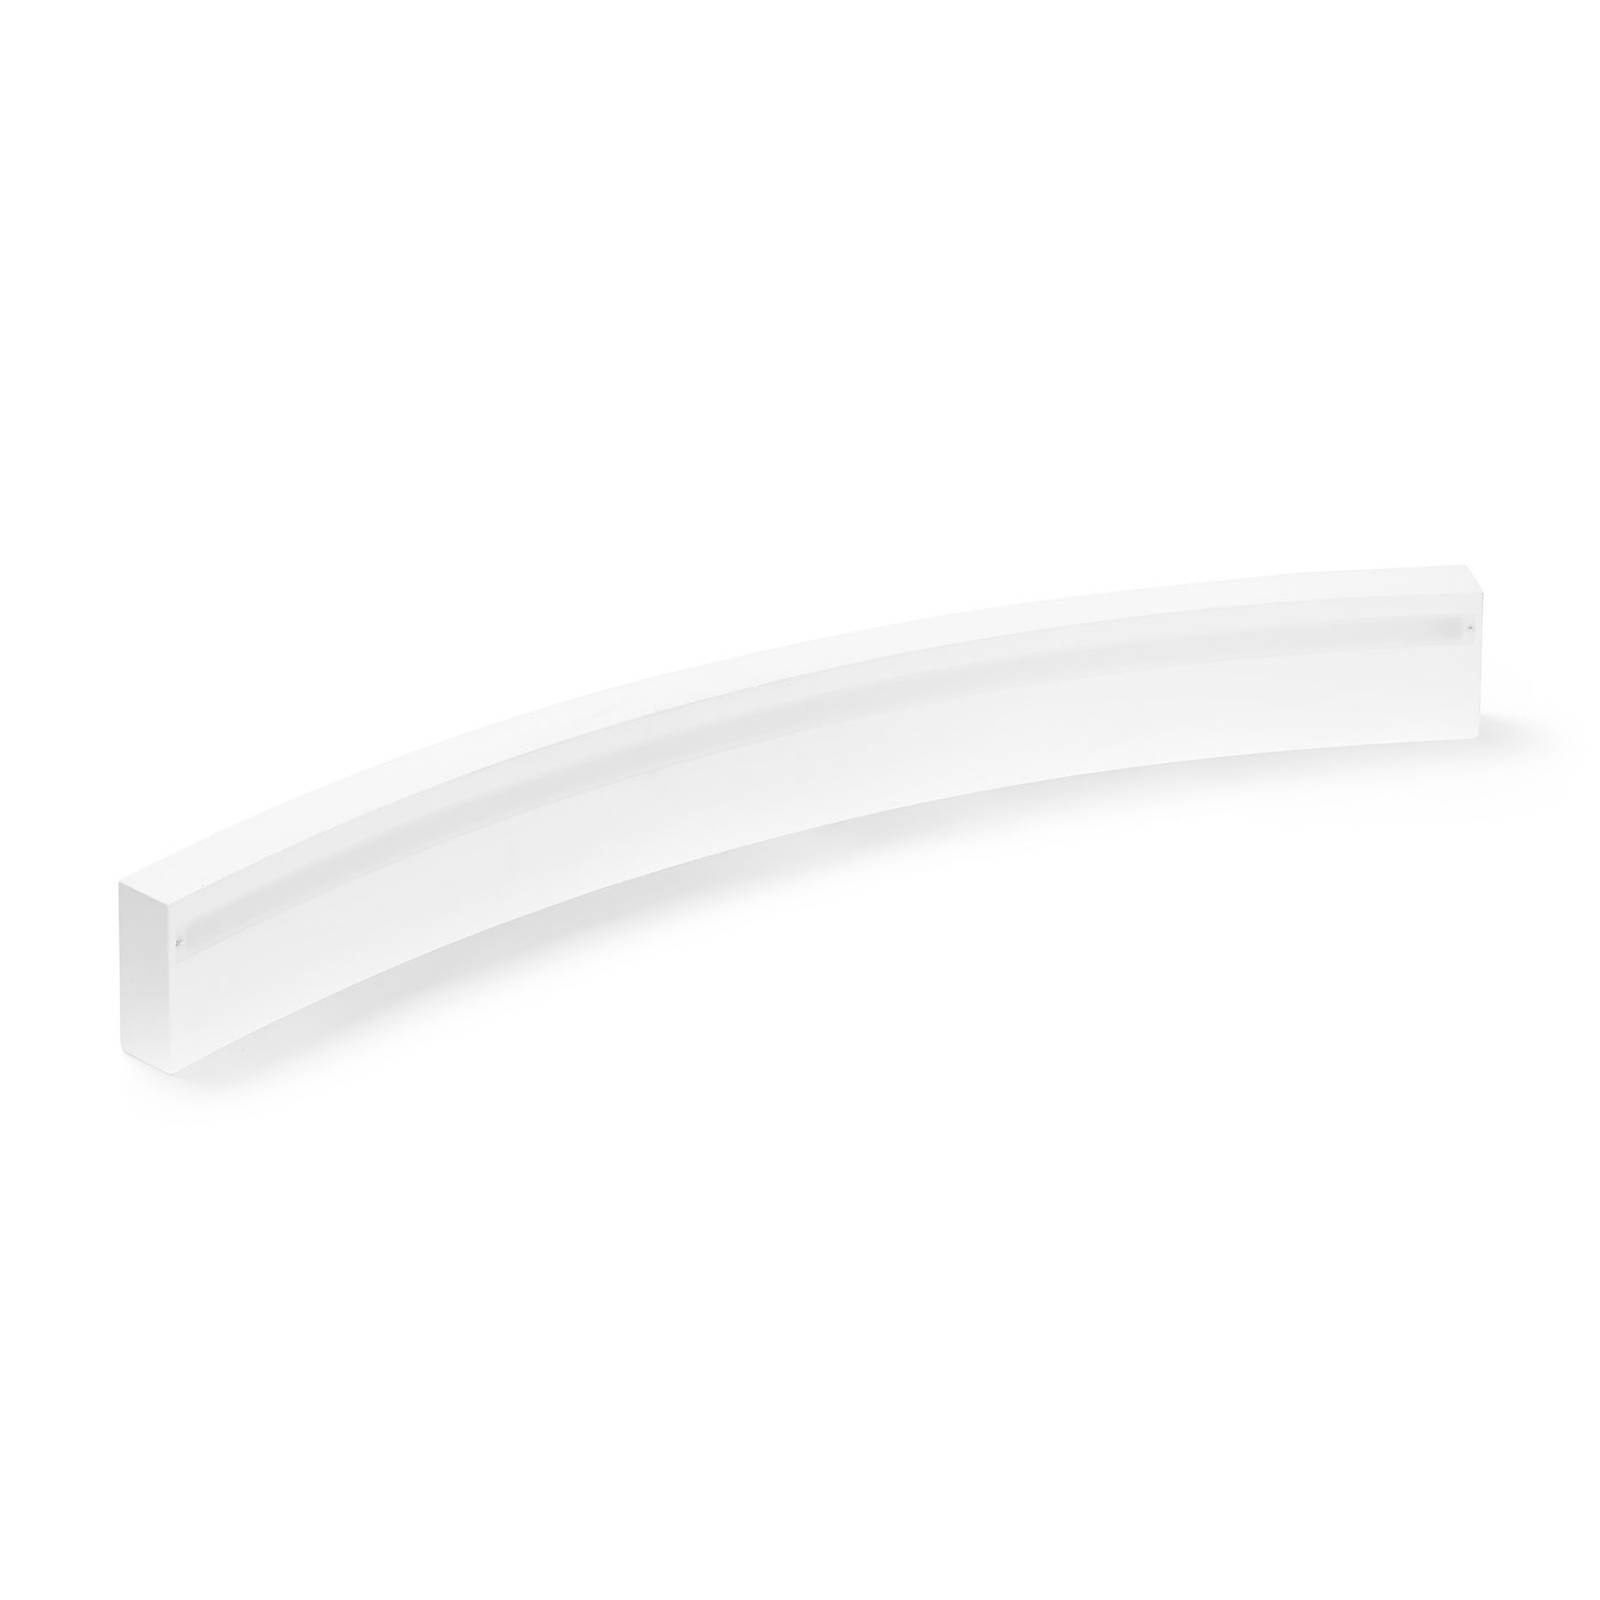 TECNICO by Sforzin LED-Wandleuchte Melossia, Up-and-Down, 76,5 cm